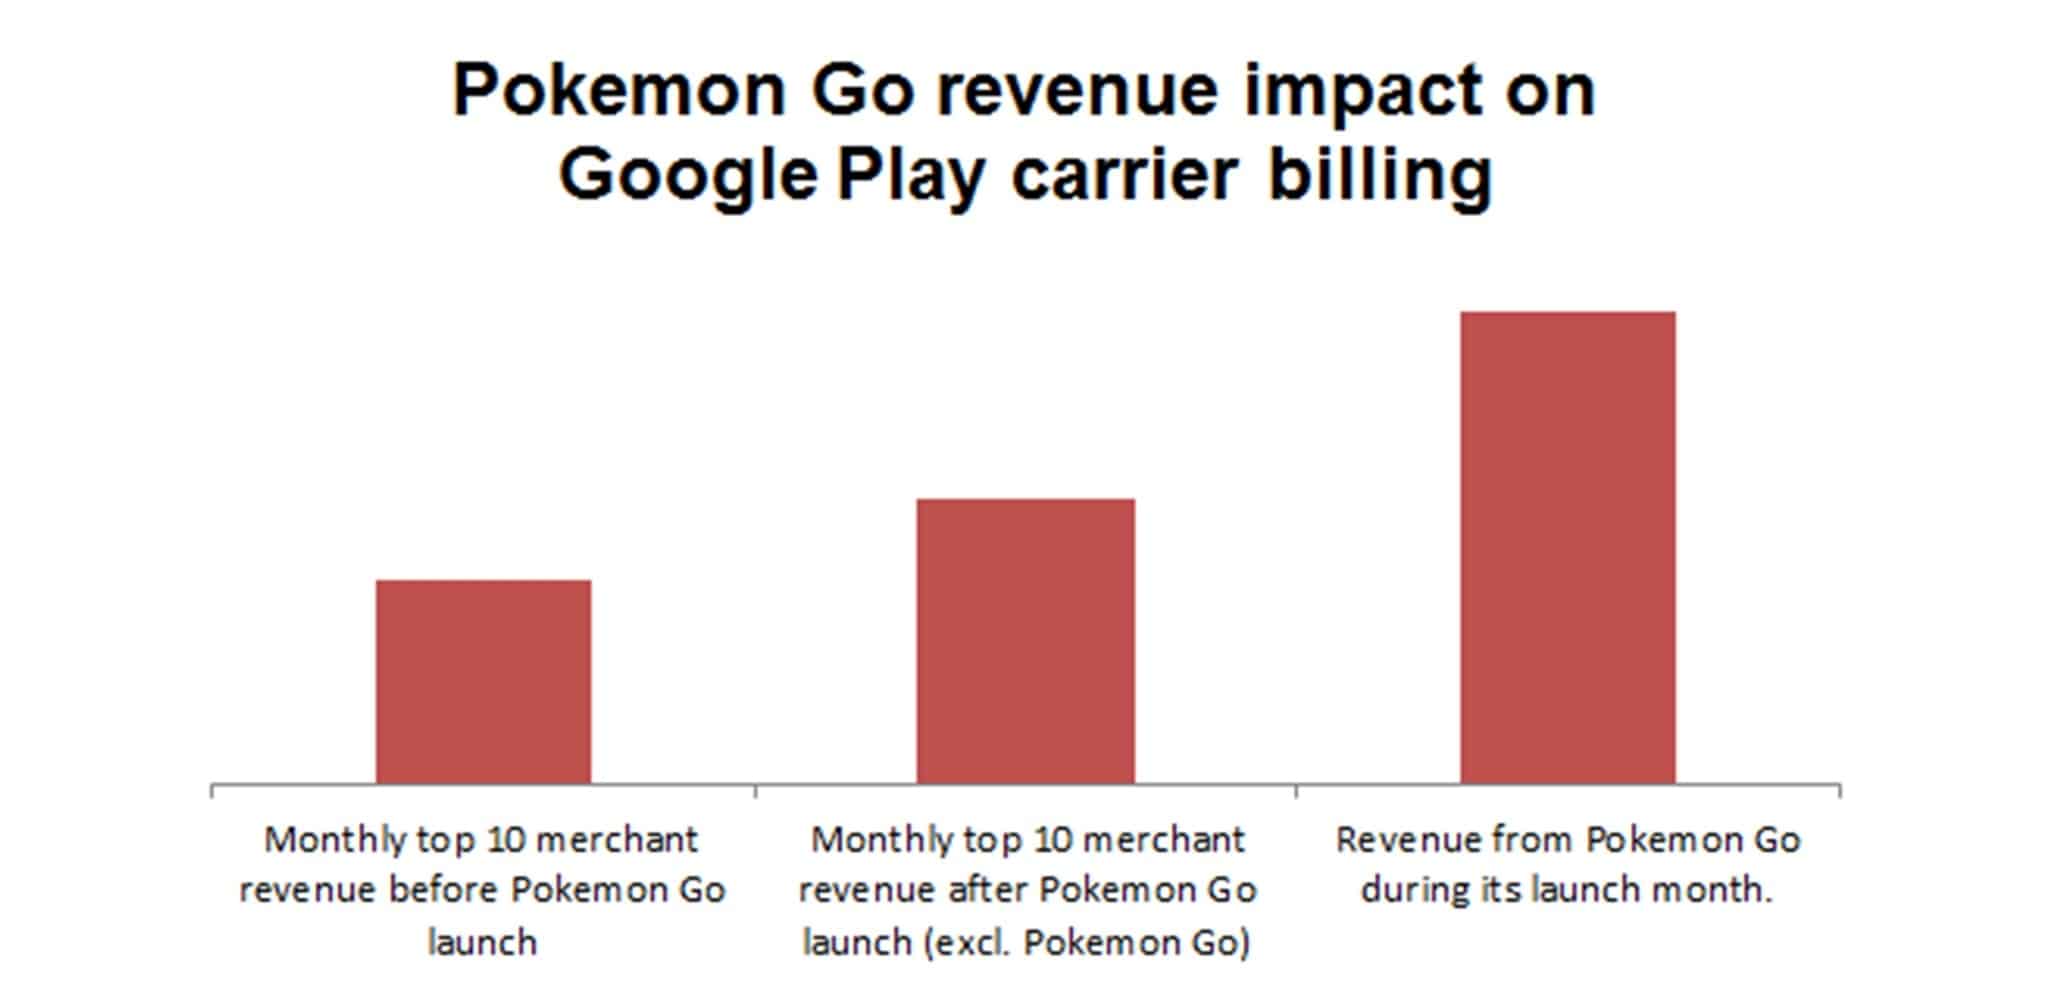 How Can Carriers Benefit from the Pokemon Go Craze?